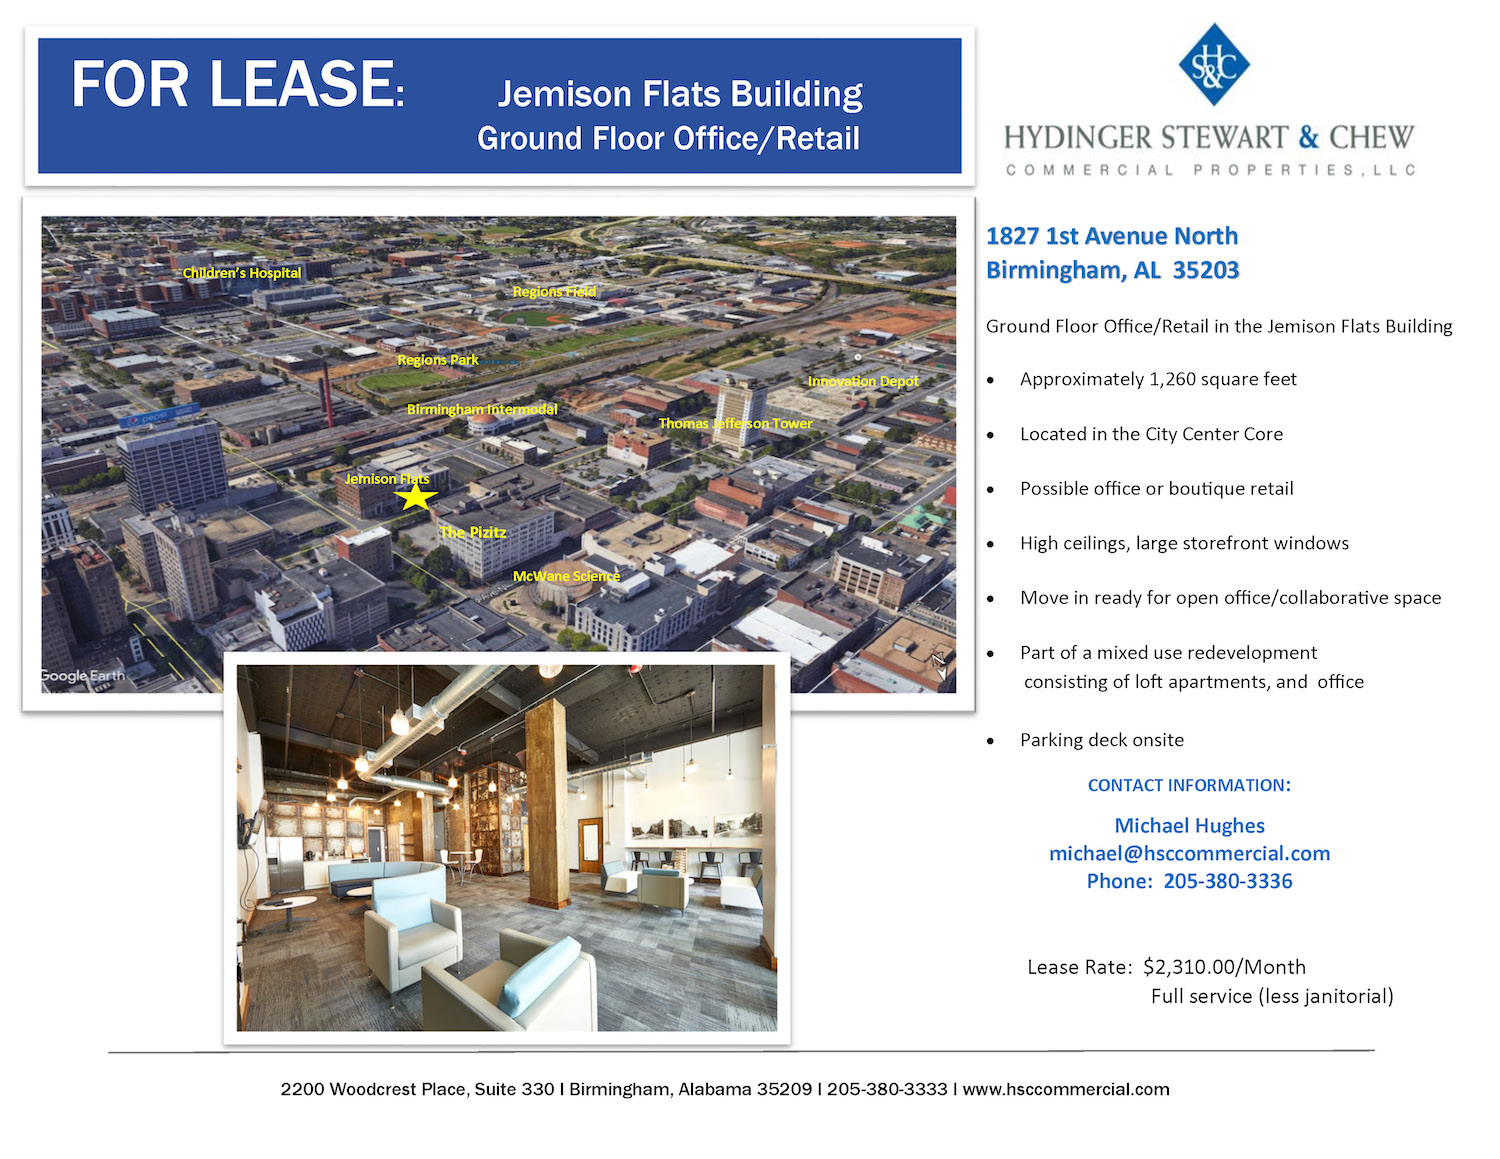 Commercial space for lease at Jemison Flats in Downtown Birmingham, AL